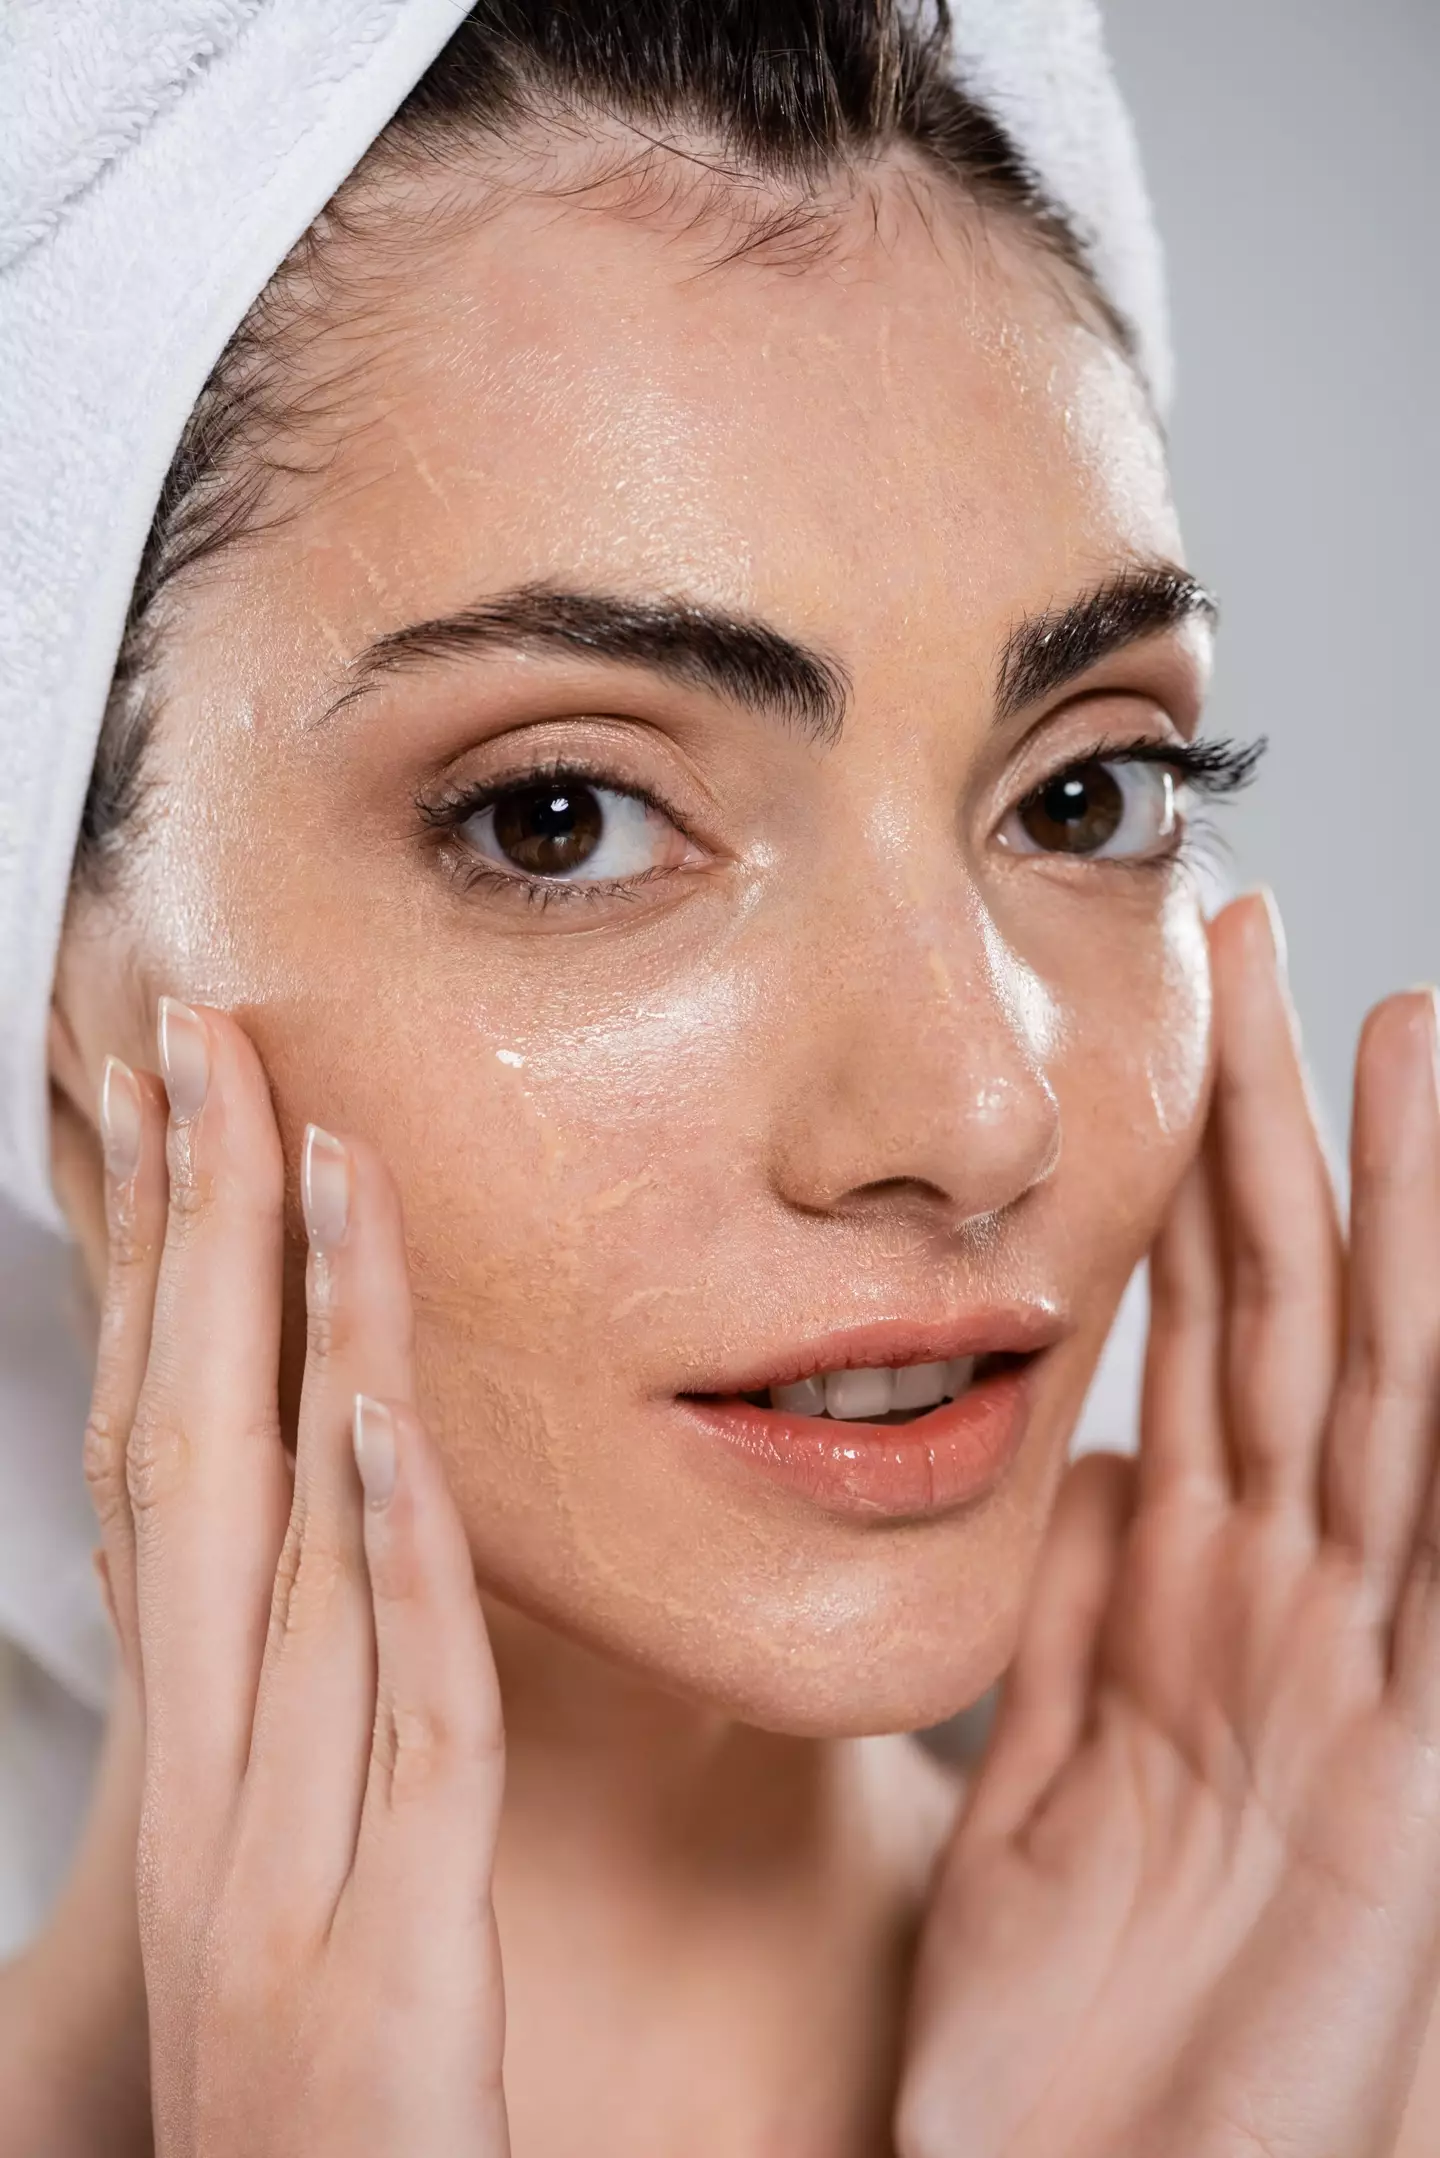 Micellar water can leave an oily residue (